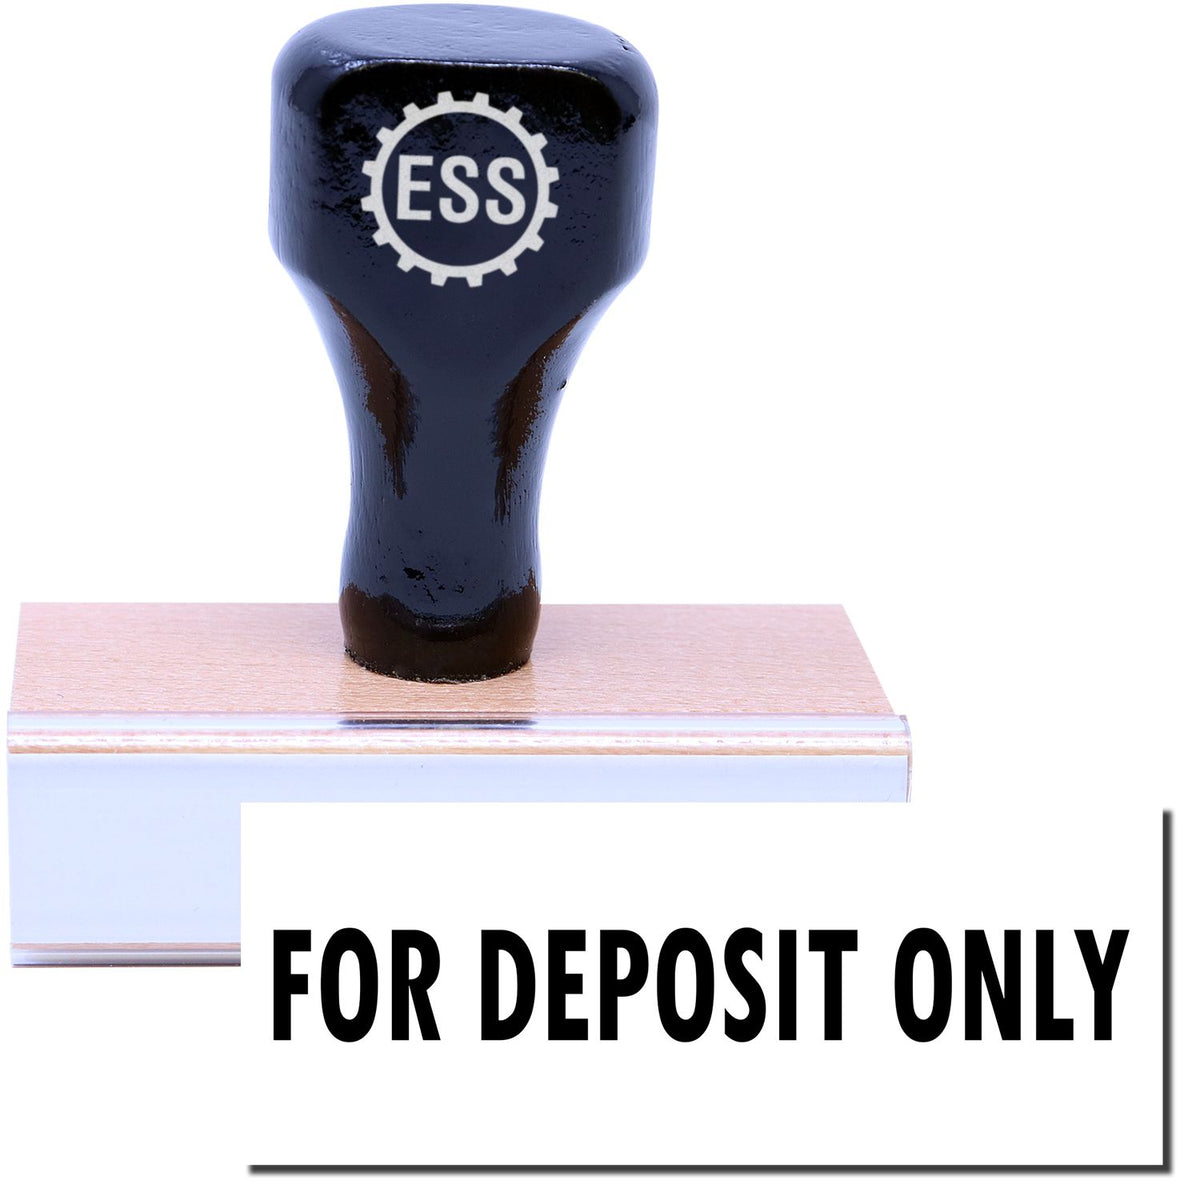 A stock office rubber stamp with a stamped image showing how the text &quot;FOR DEPOSIT ONLY&quot; in a large font is displayed after stamping.